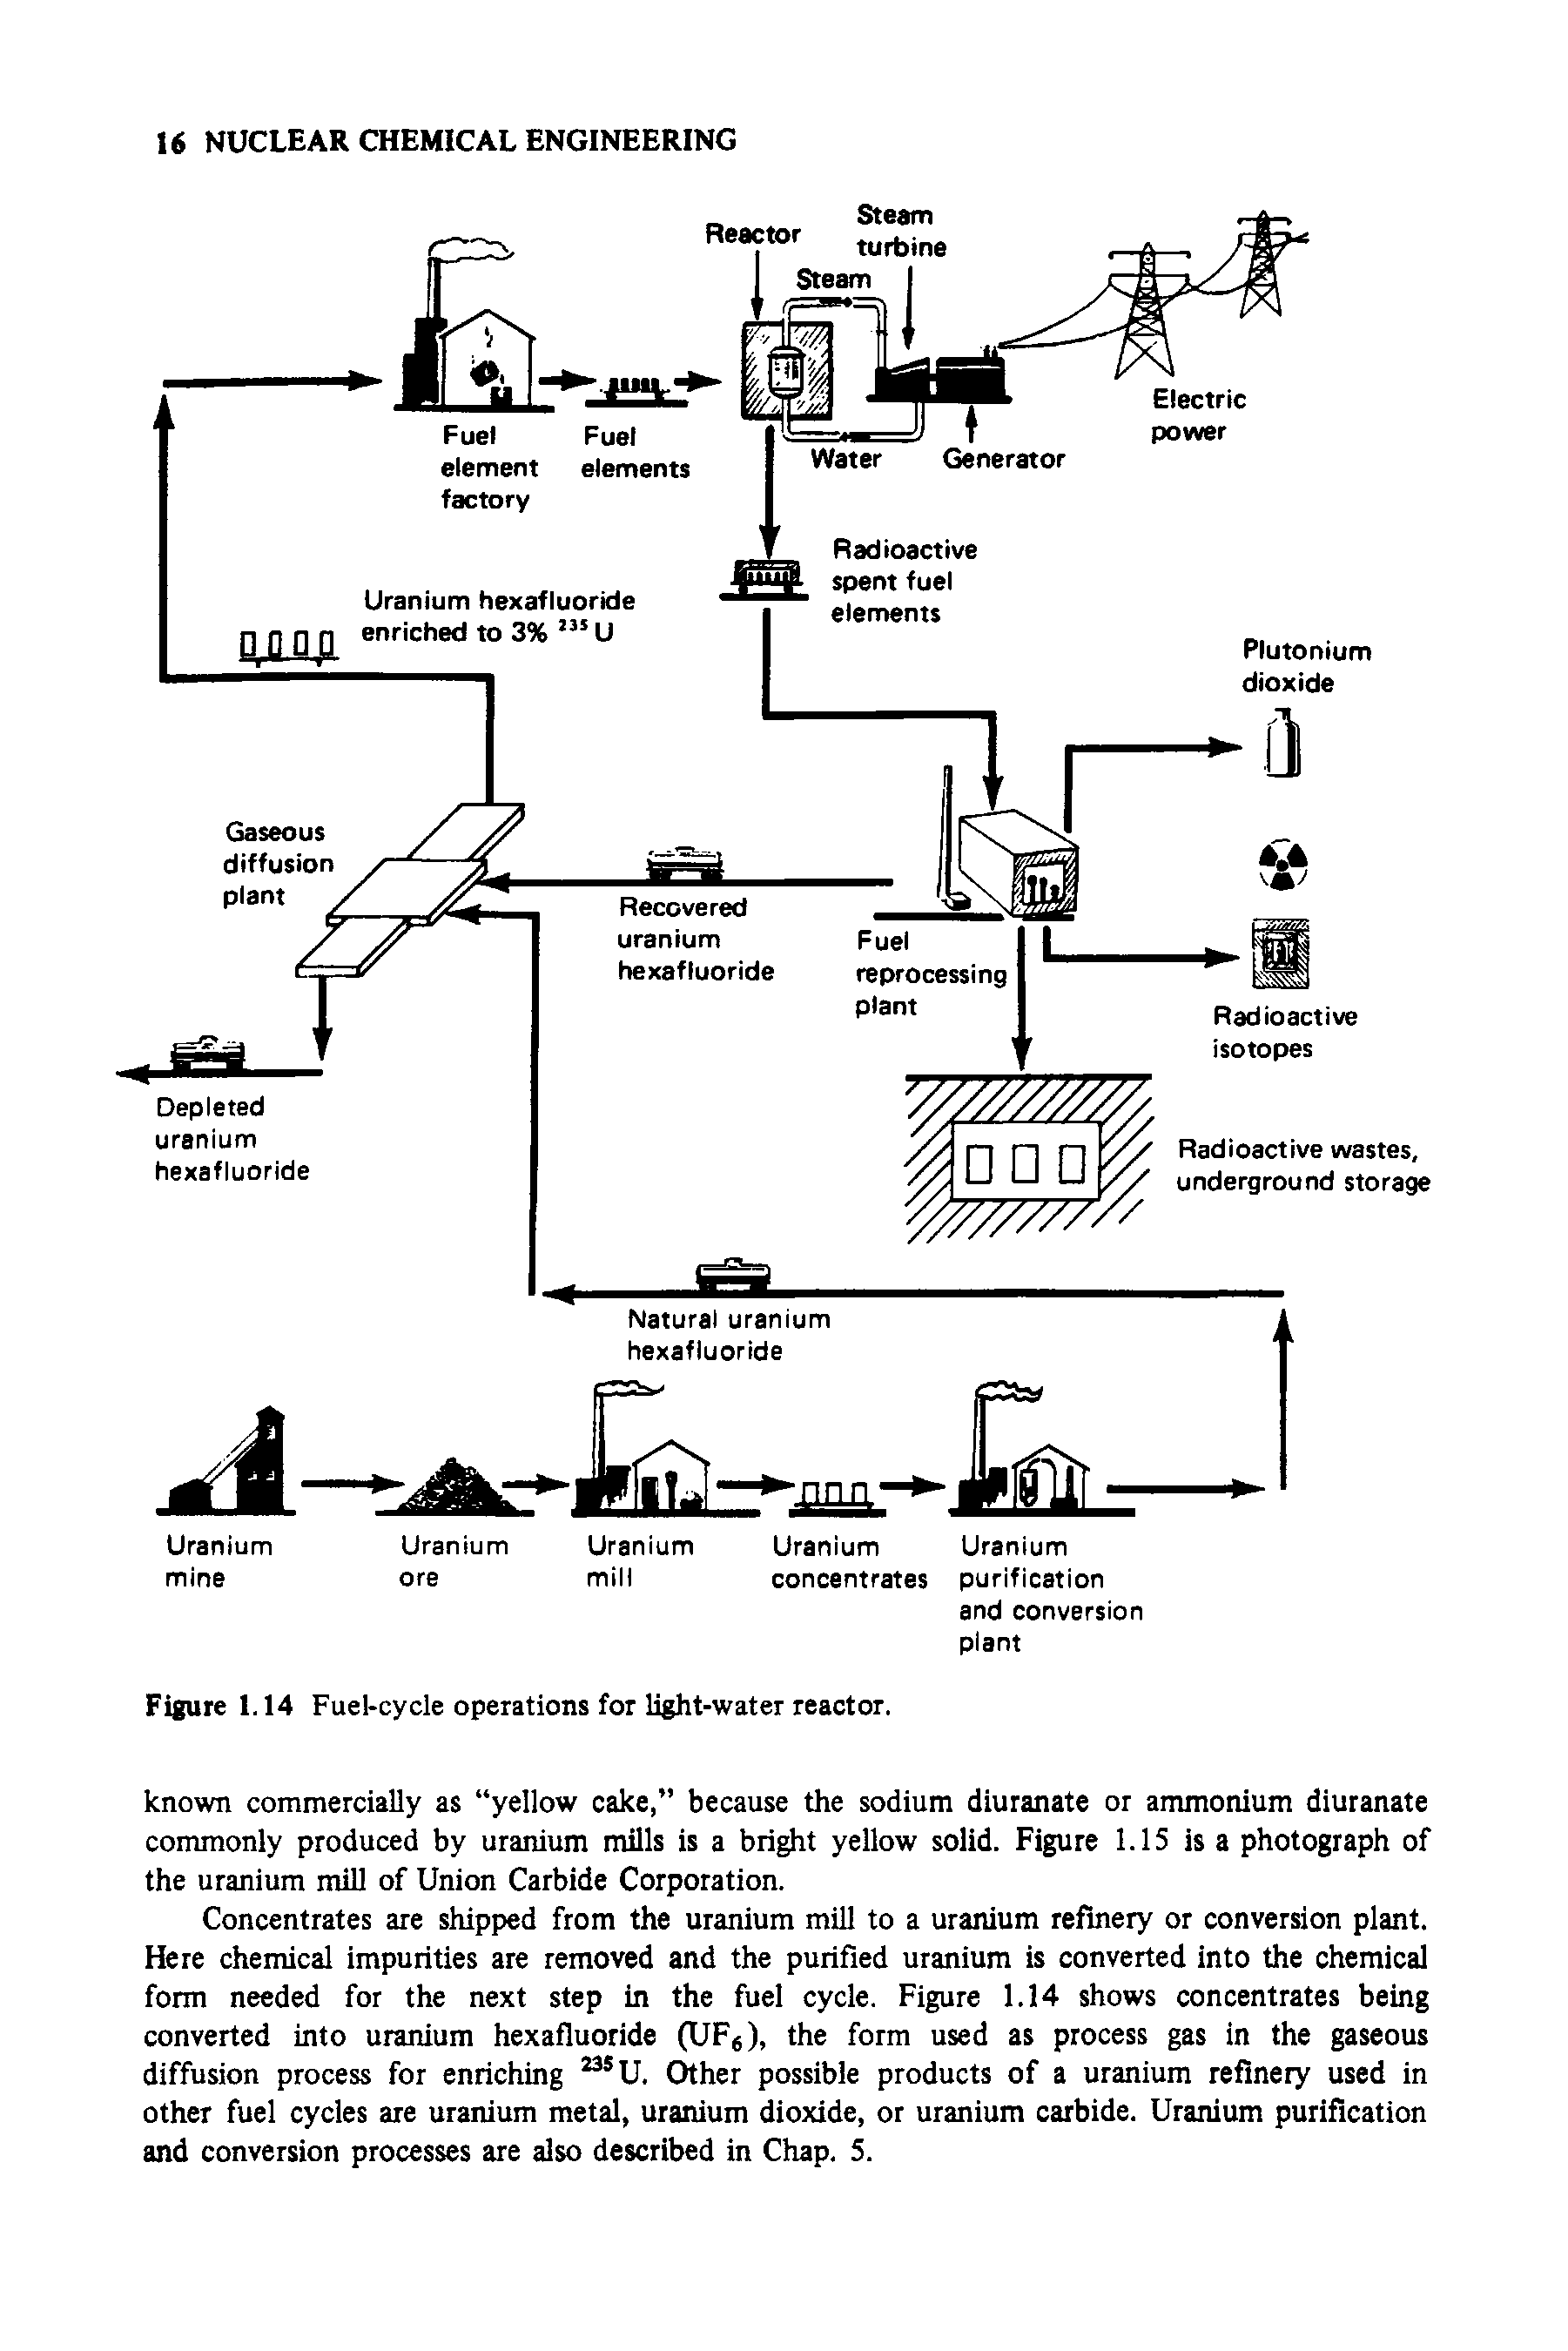 Figure 1.14 Fuel-cycle operations for light-water reactor.